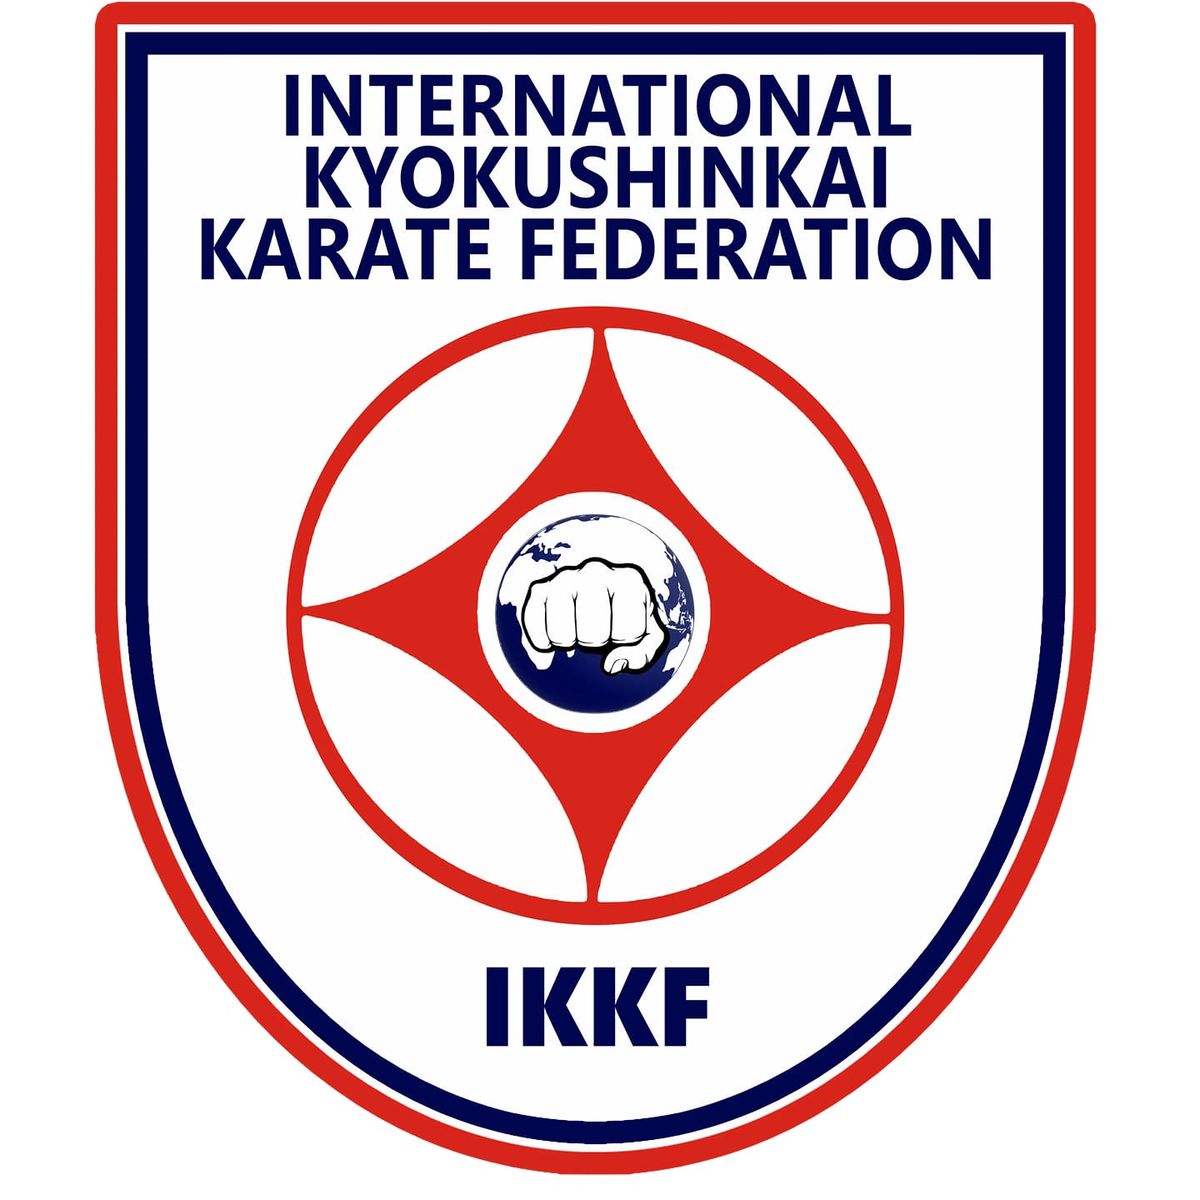 2nd KATA Competition for a Cause!